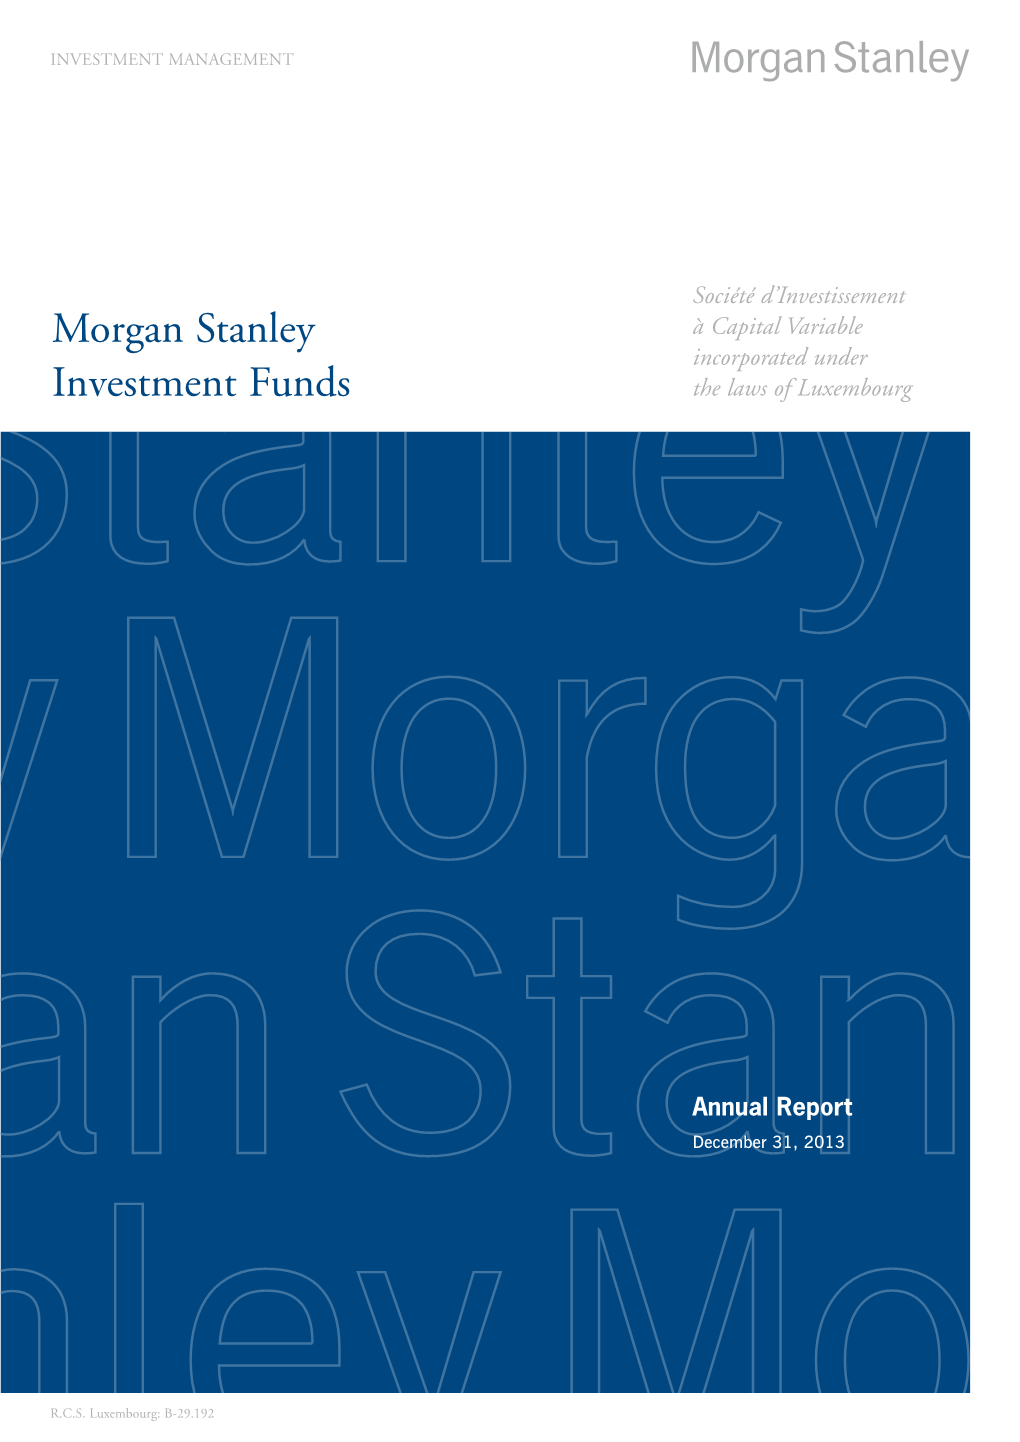 Morgan Stanley Investment Funds 31 December 2013